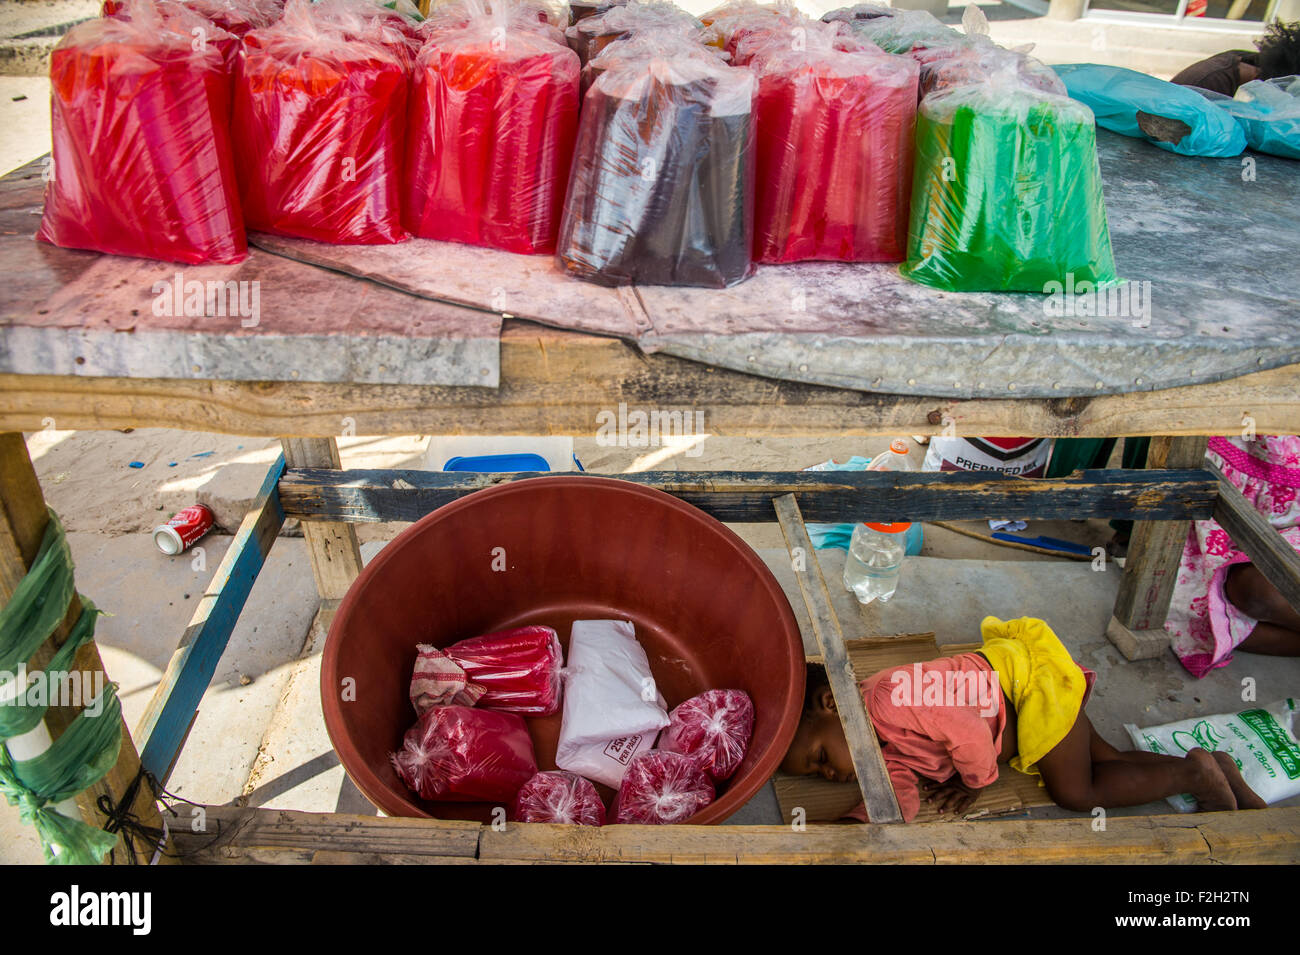 Bagged fruited beverages for sale at a market with a sleeping girl underneath the table in Botswana, Africa Stock Photo